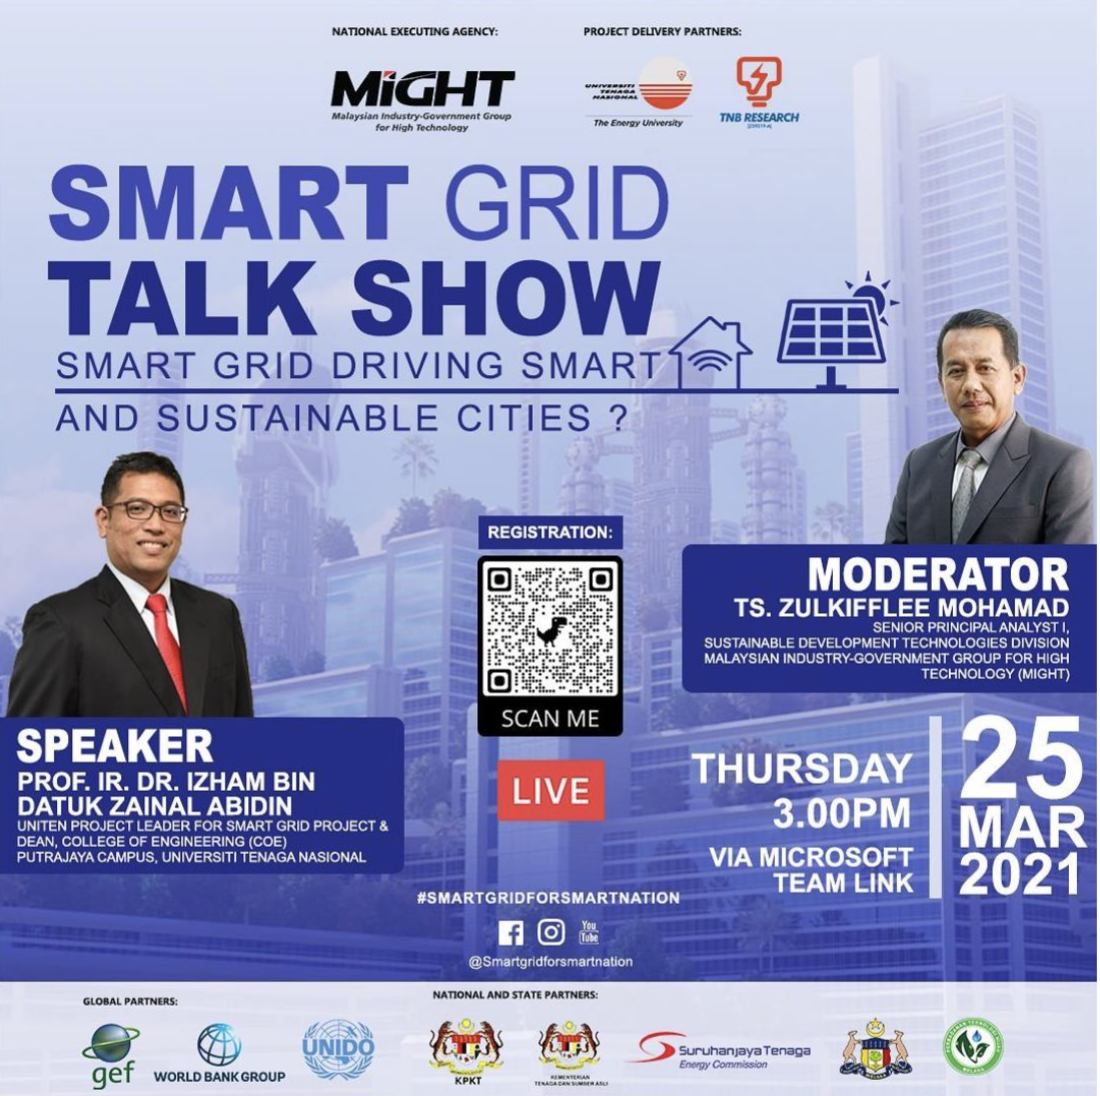 Smart Grid Talk Show: Smart Grid Driving Smart and Sustainable Cities